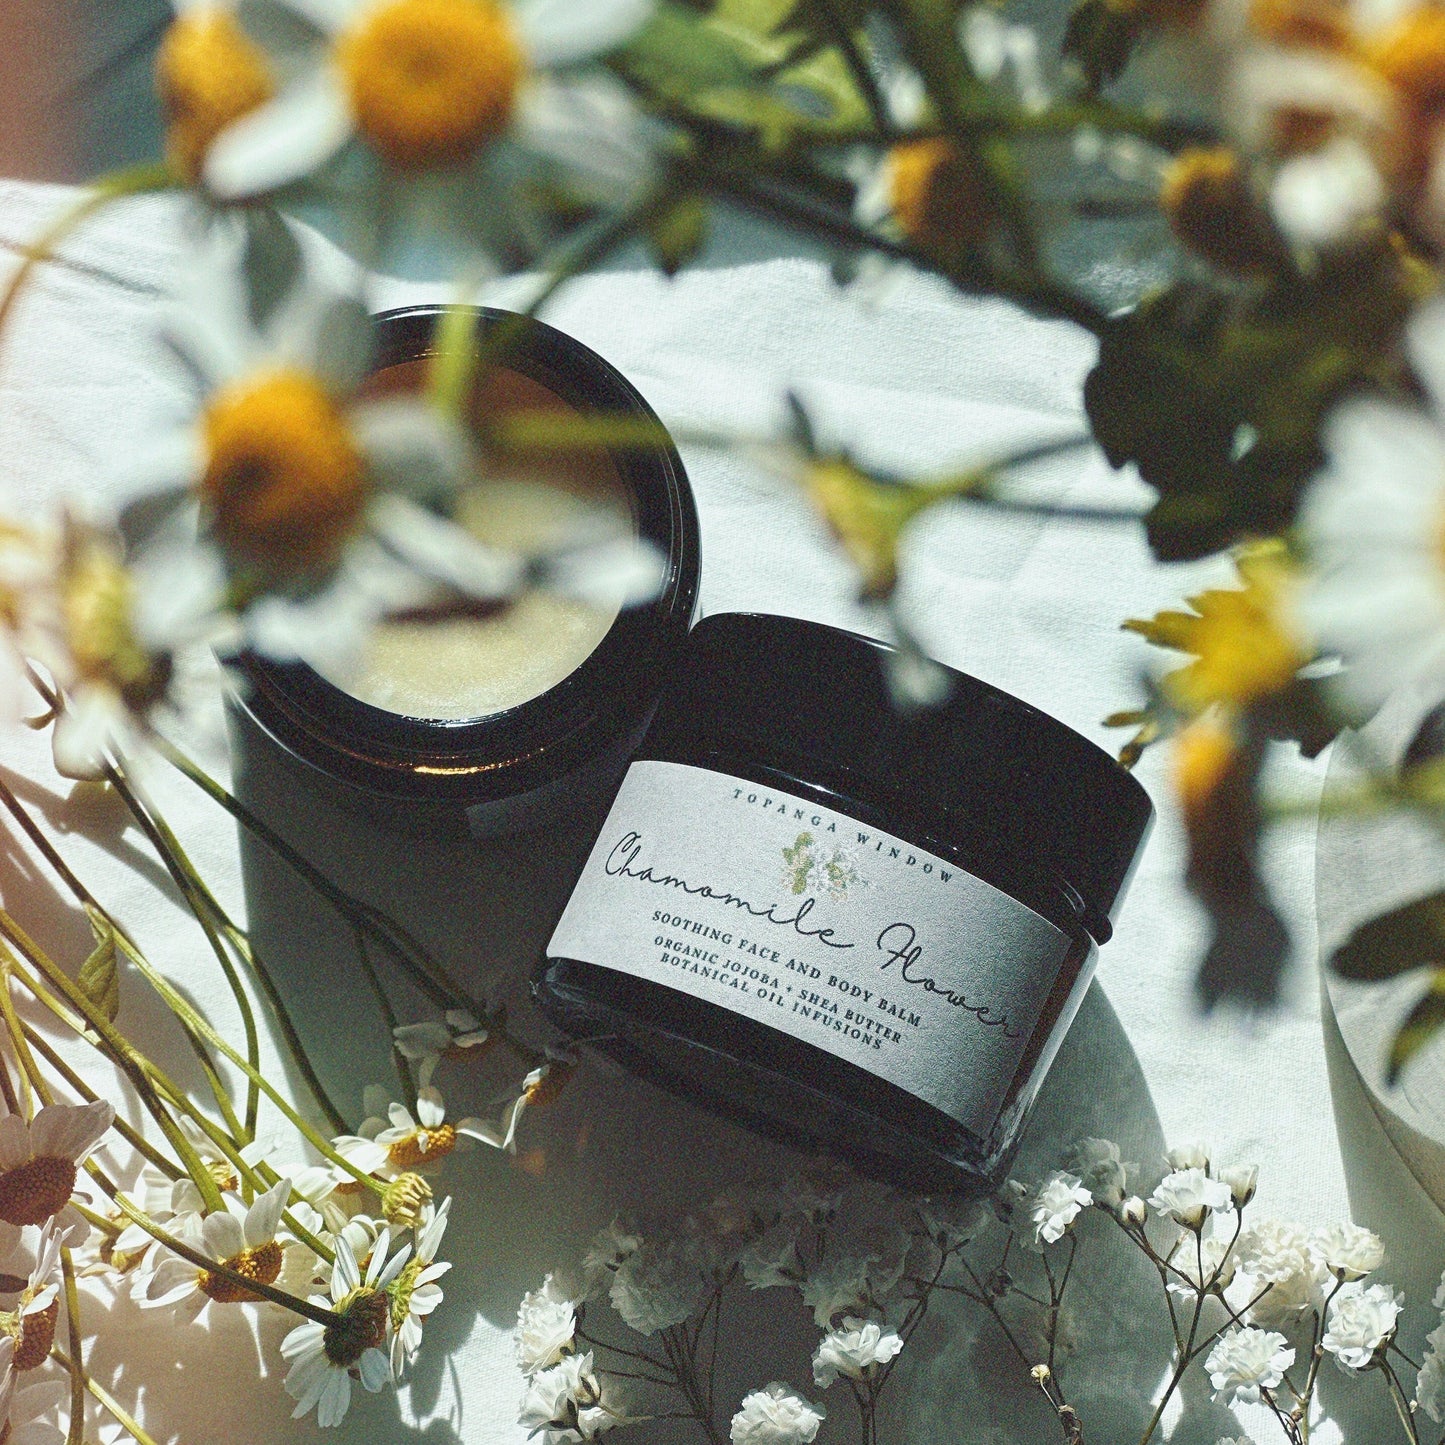 Chamomile Flower Organic Face and Body Balm